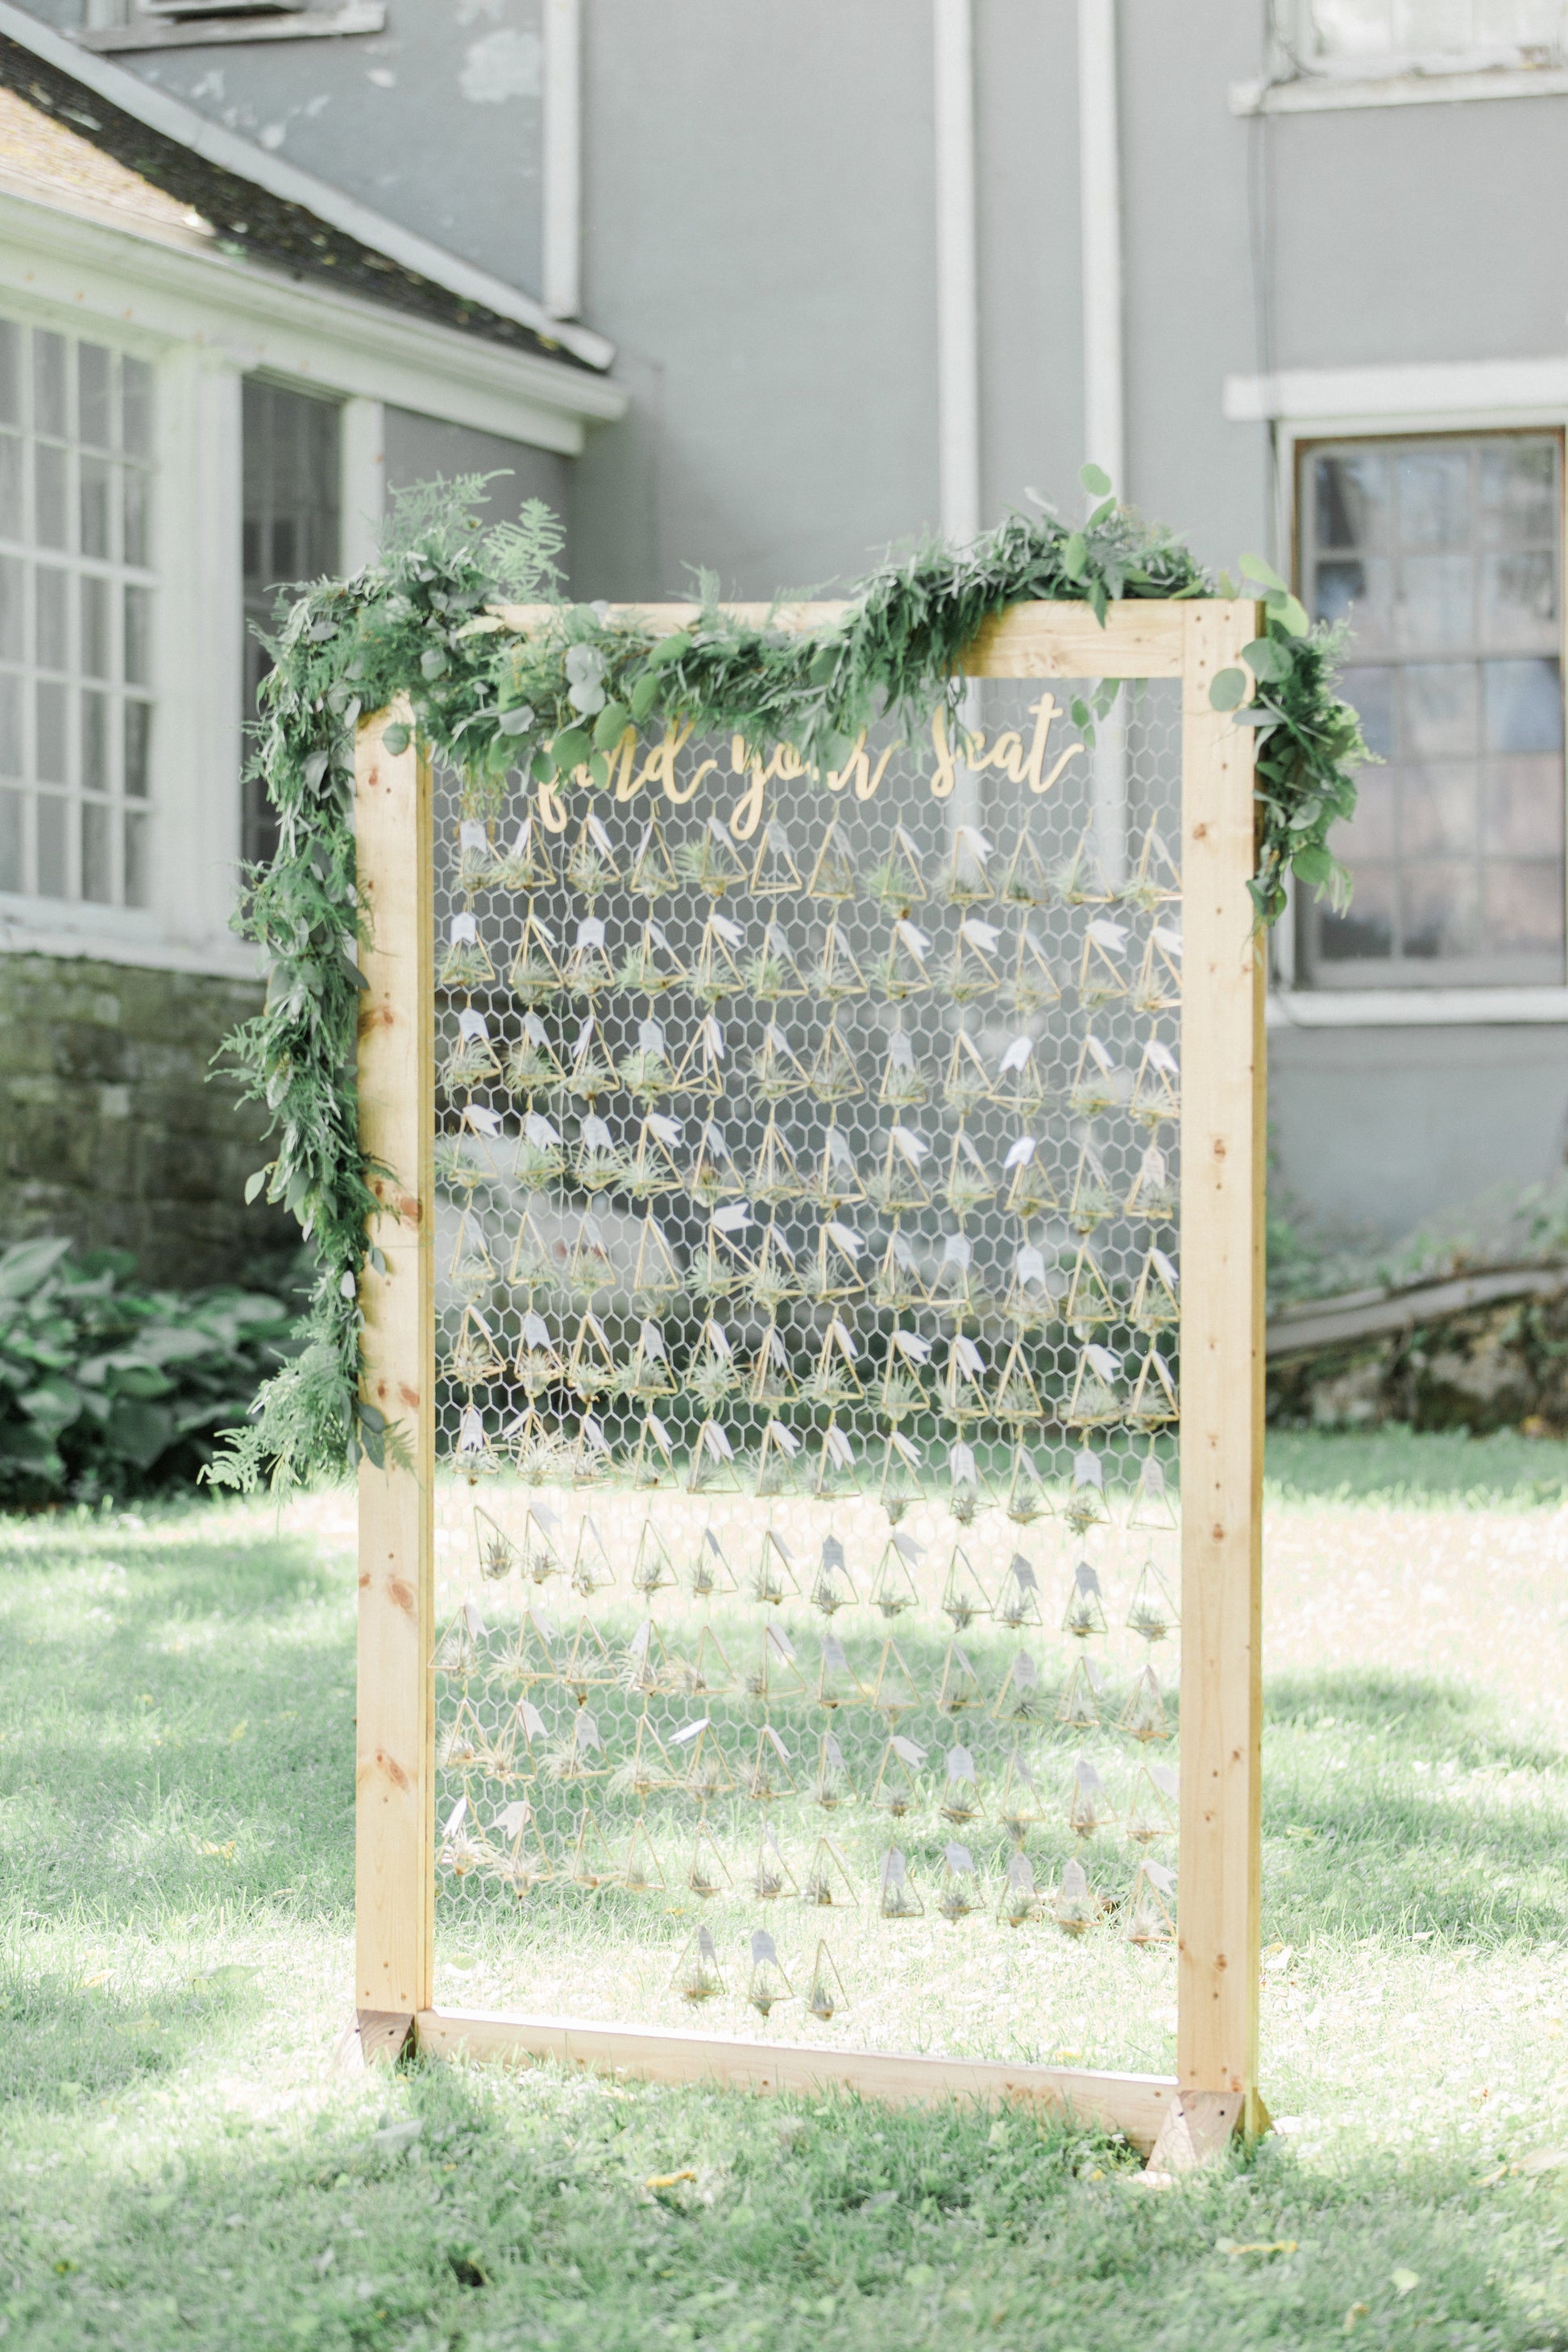 Find Your Seat Escort Card Signs - Wedding Decor Gifts